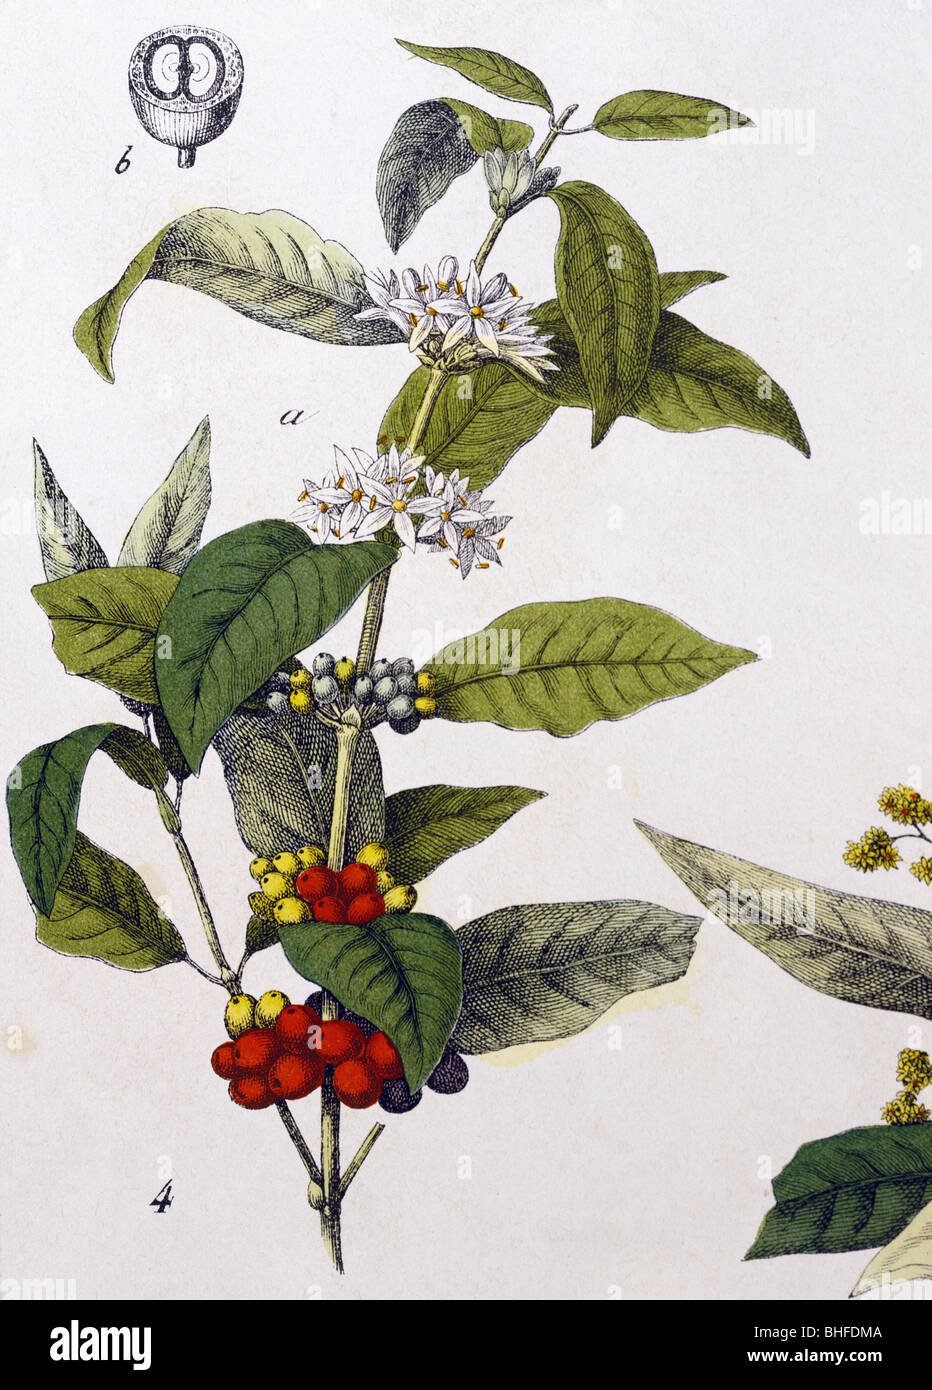 botany, Coffea, Arabica coffee (Coffea arabica), twig with blossoms and fruits, from "Naturgeschichte des Pflanzenreichs" (Natural history of the kingdom of plants), Esslingen, Germany, 1869, private collection, Stock Photo